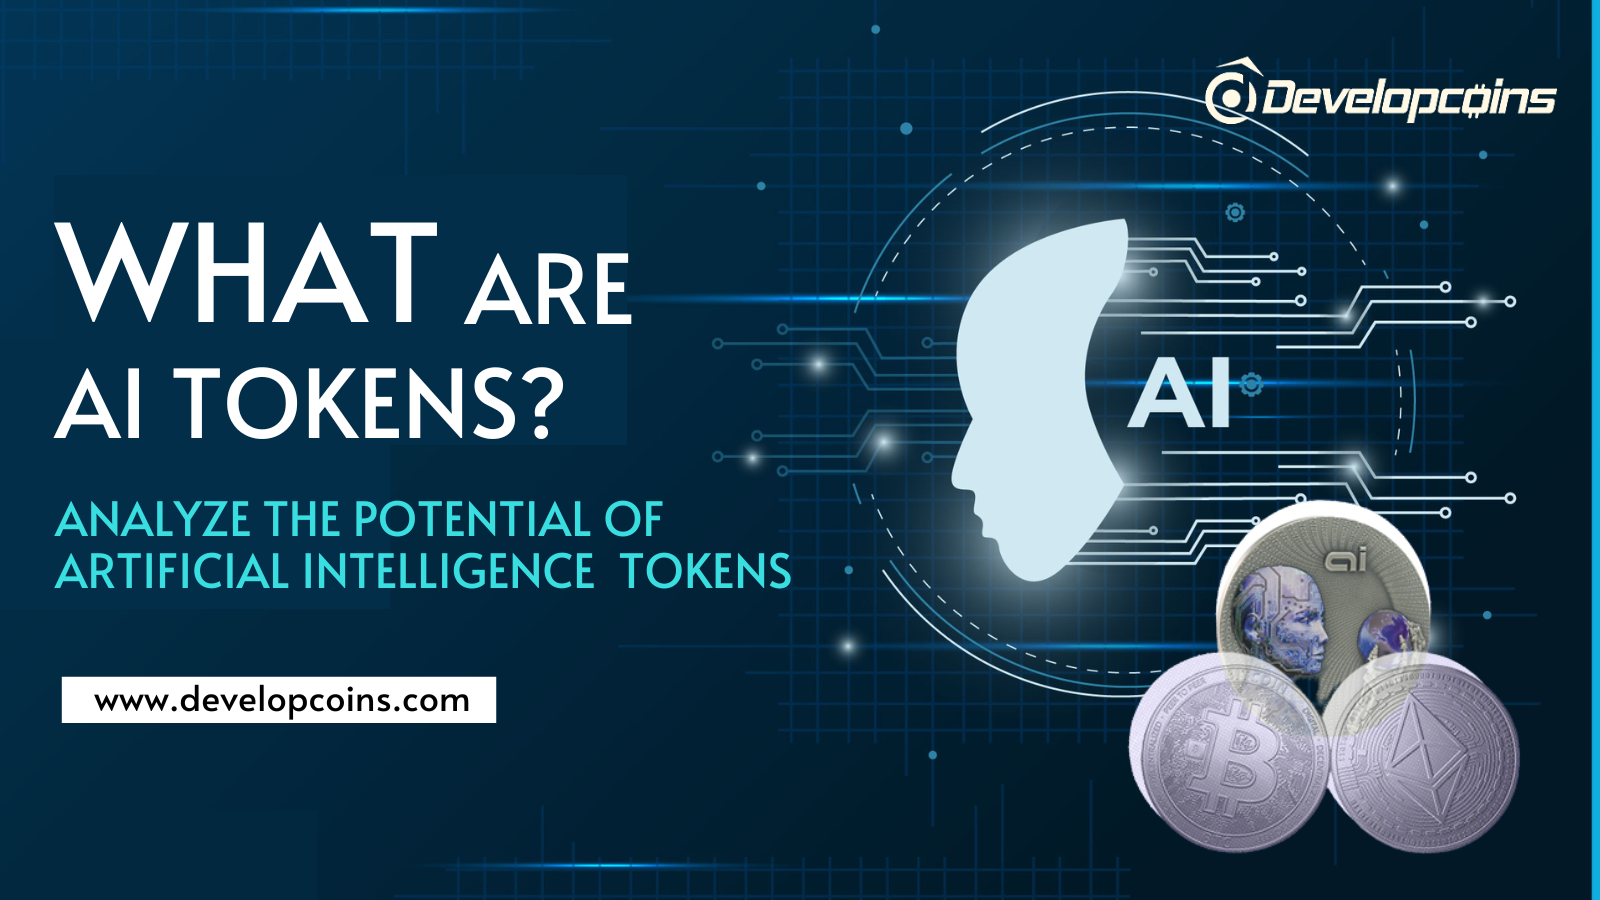 What Are AI Tokens? - Analyze the Potential of AI Tokens